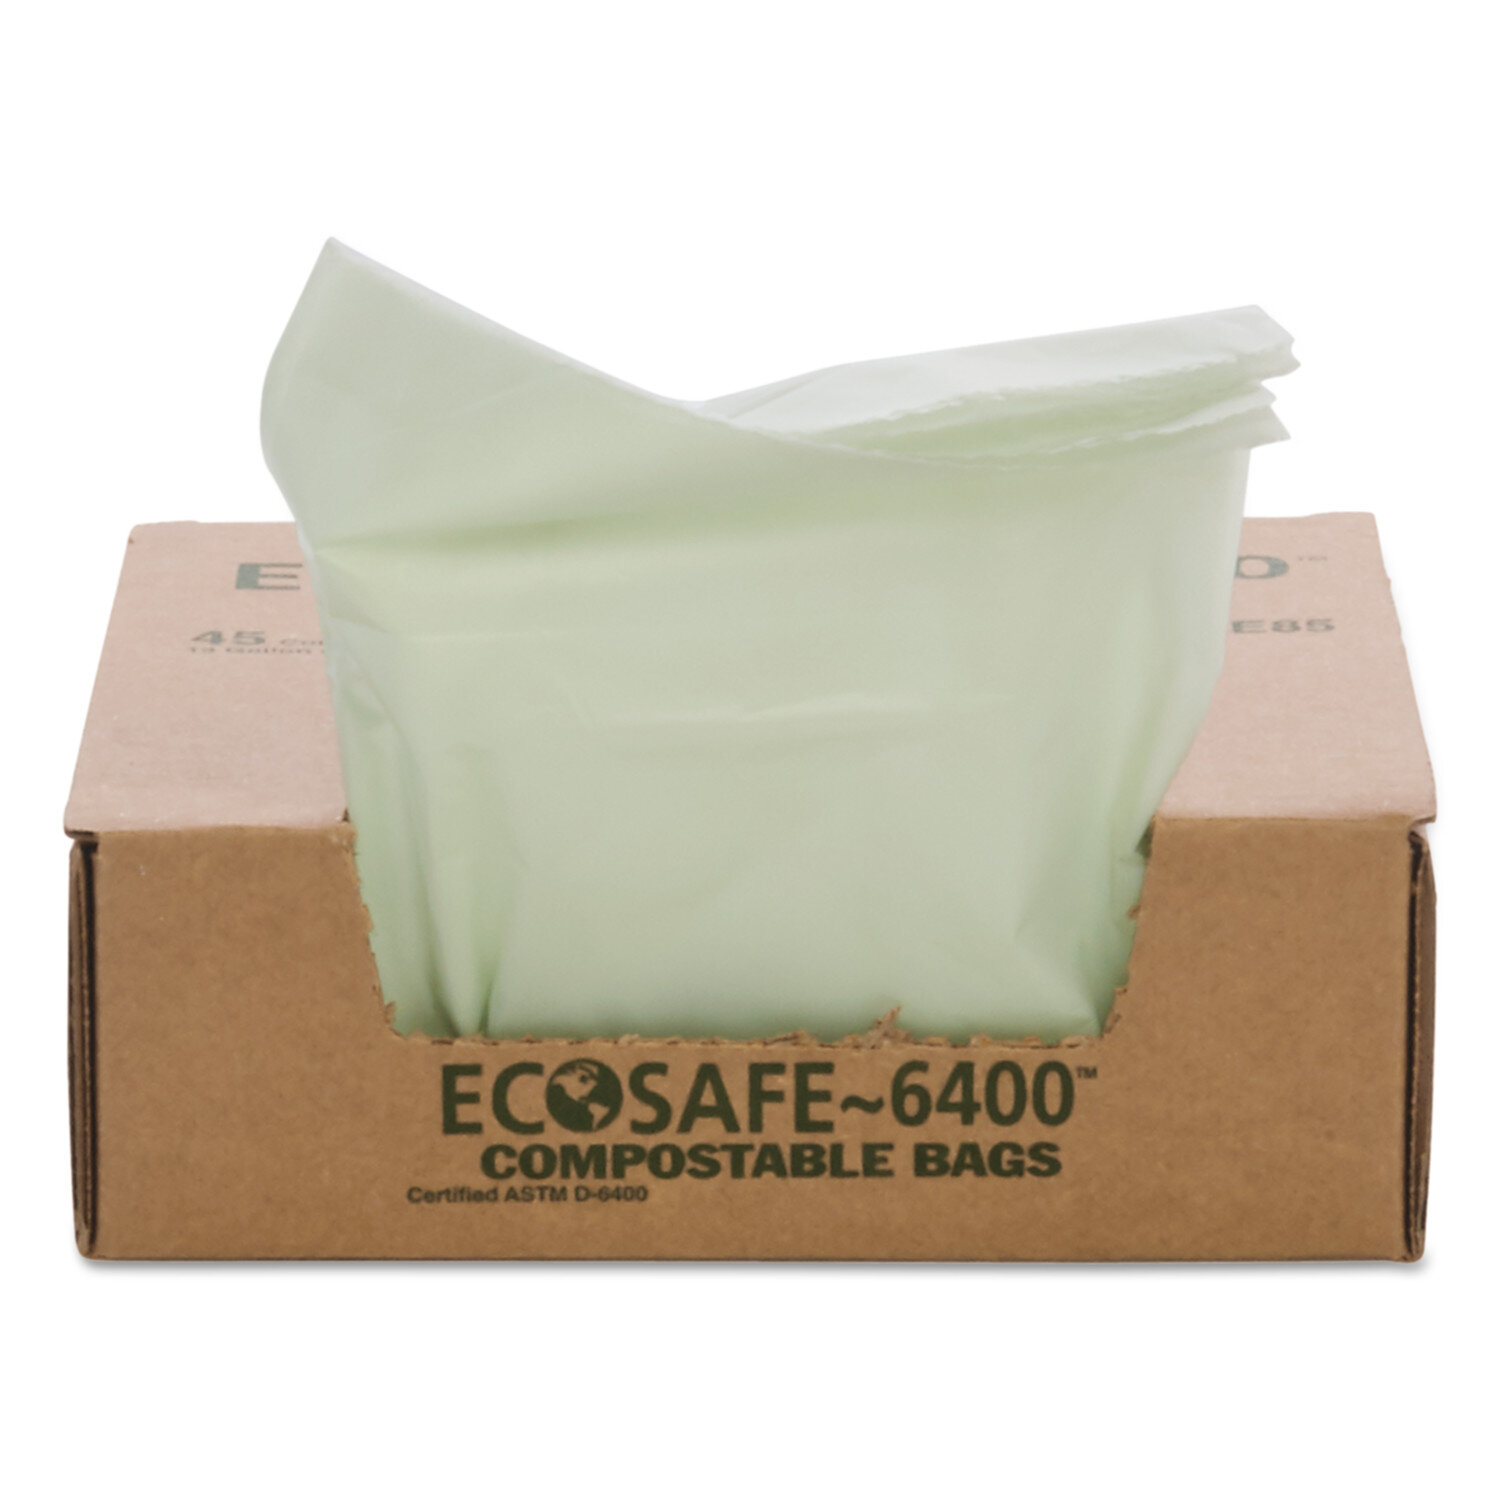 EcoSafe-6400 Bags, 32 gal, 0.85 mil, 33